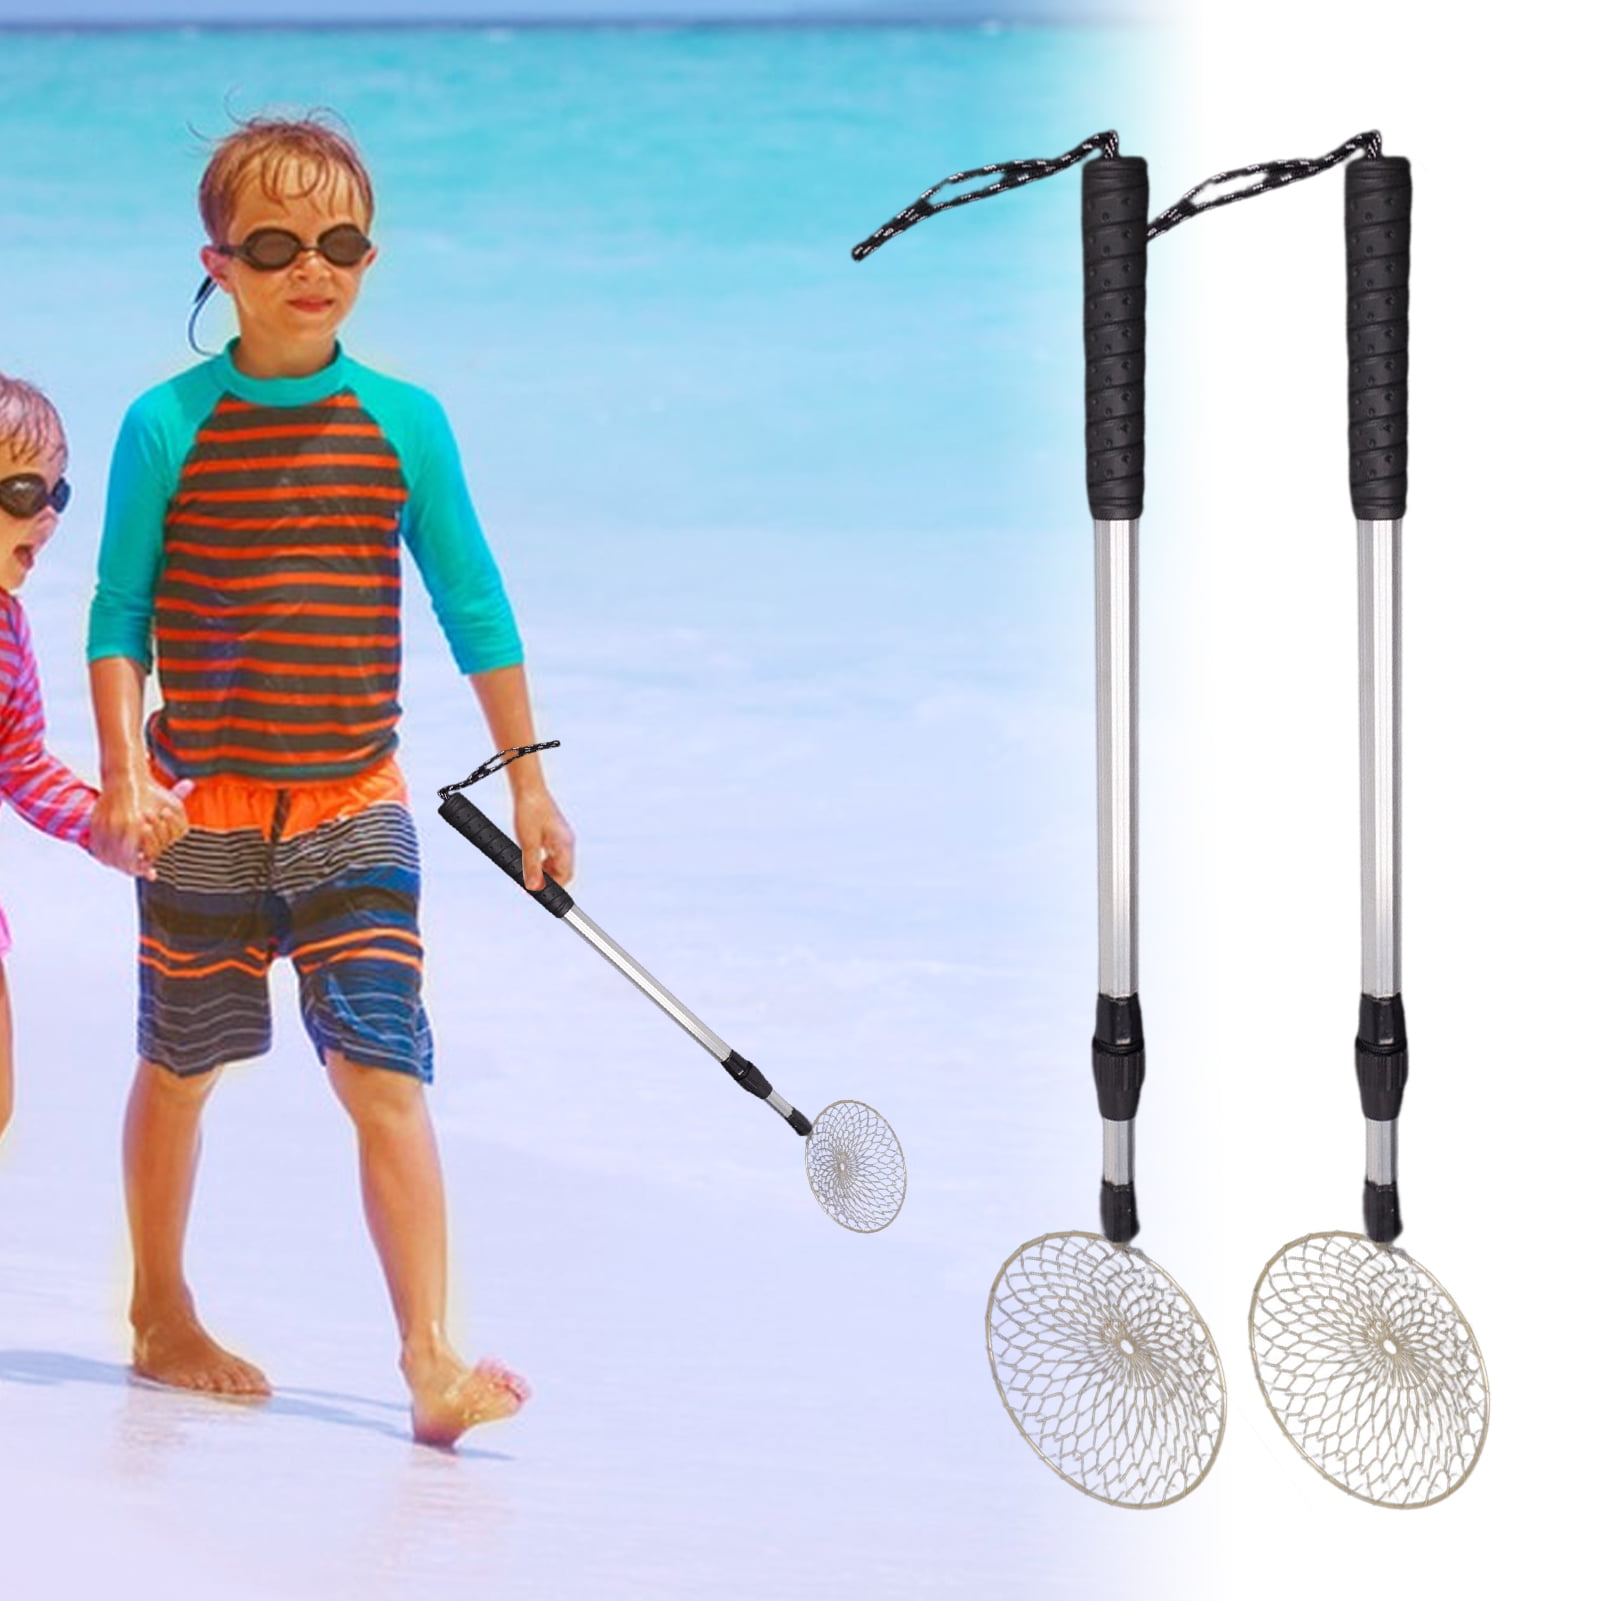  Sand Dipper Full Size Beach Scoop Shovel & Sifter Tool for  Beachcombing – Adjustable Sea Glass, Shell, Shark Tooth Sifter for the  Beach – Can Be Used as a Walking or